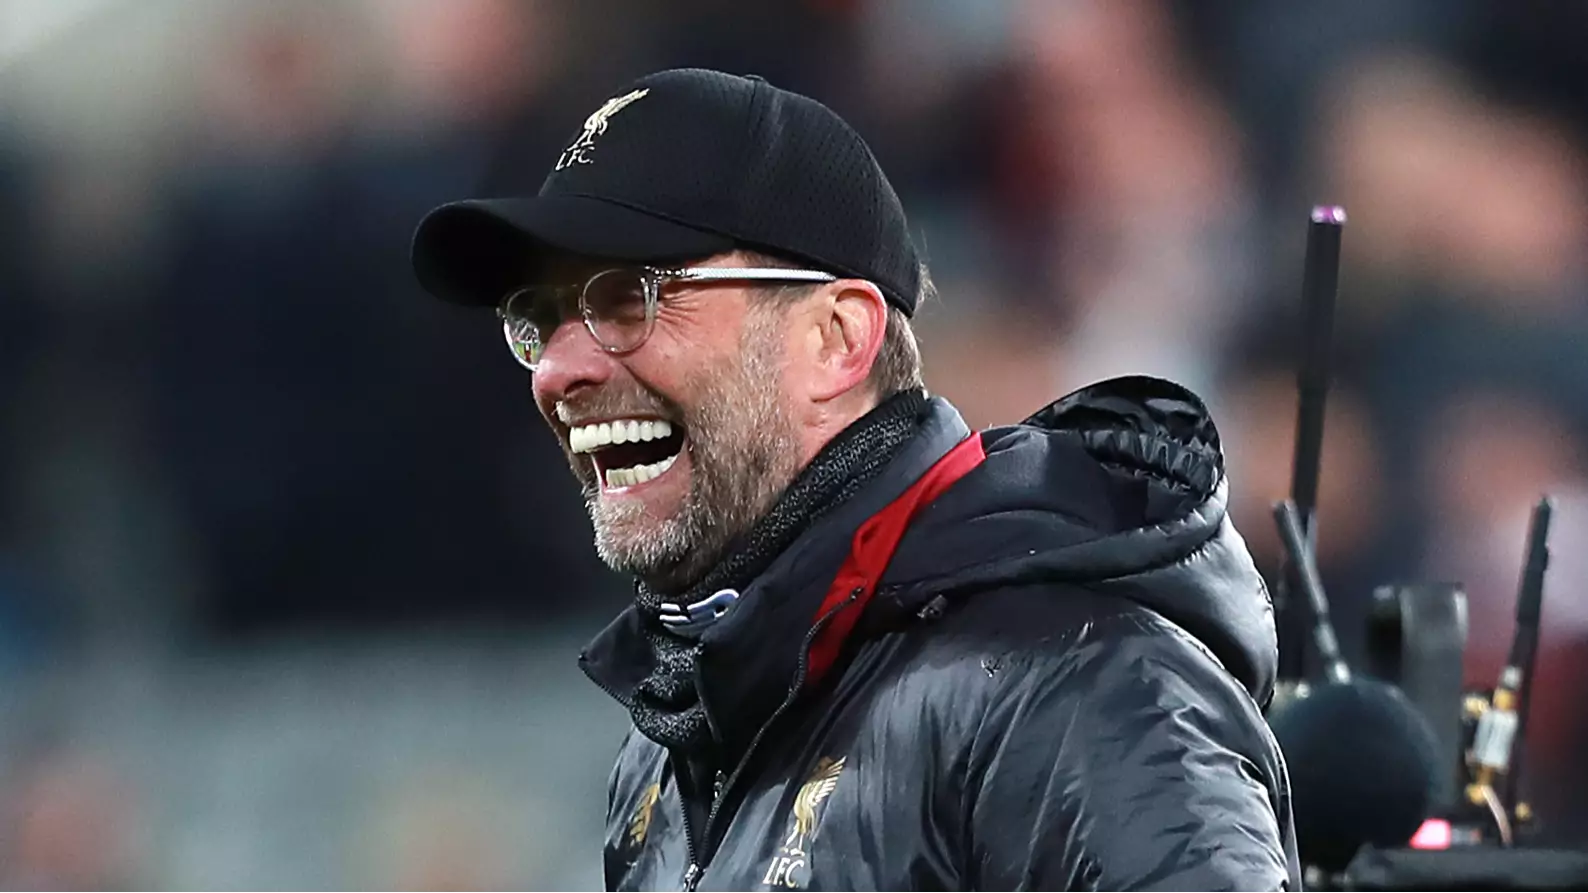 Bayer Leverkusen Perfectly Sum Up The Liverpool Double Points Table